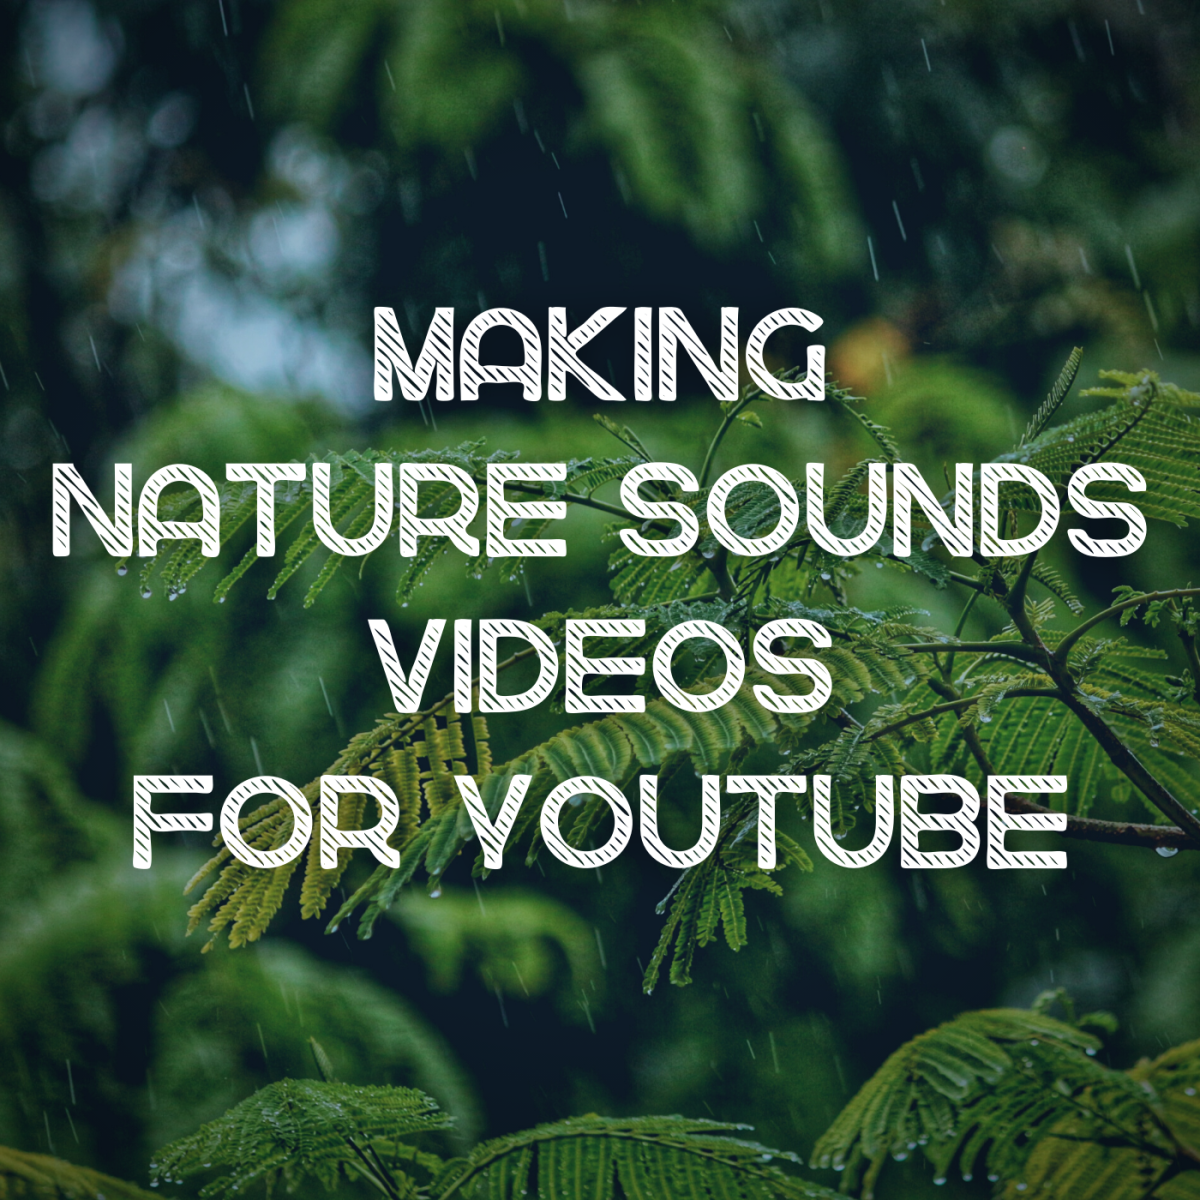 YouTube Niches: Making Nature Sound Videos